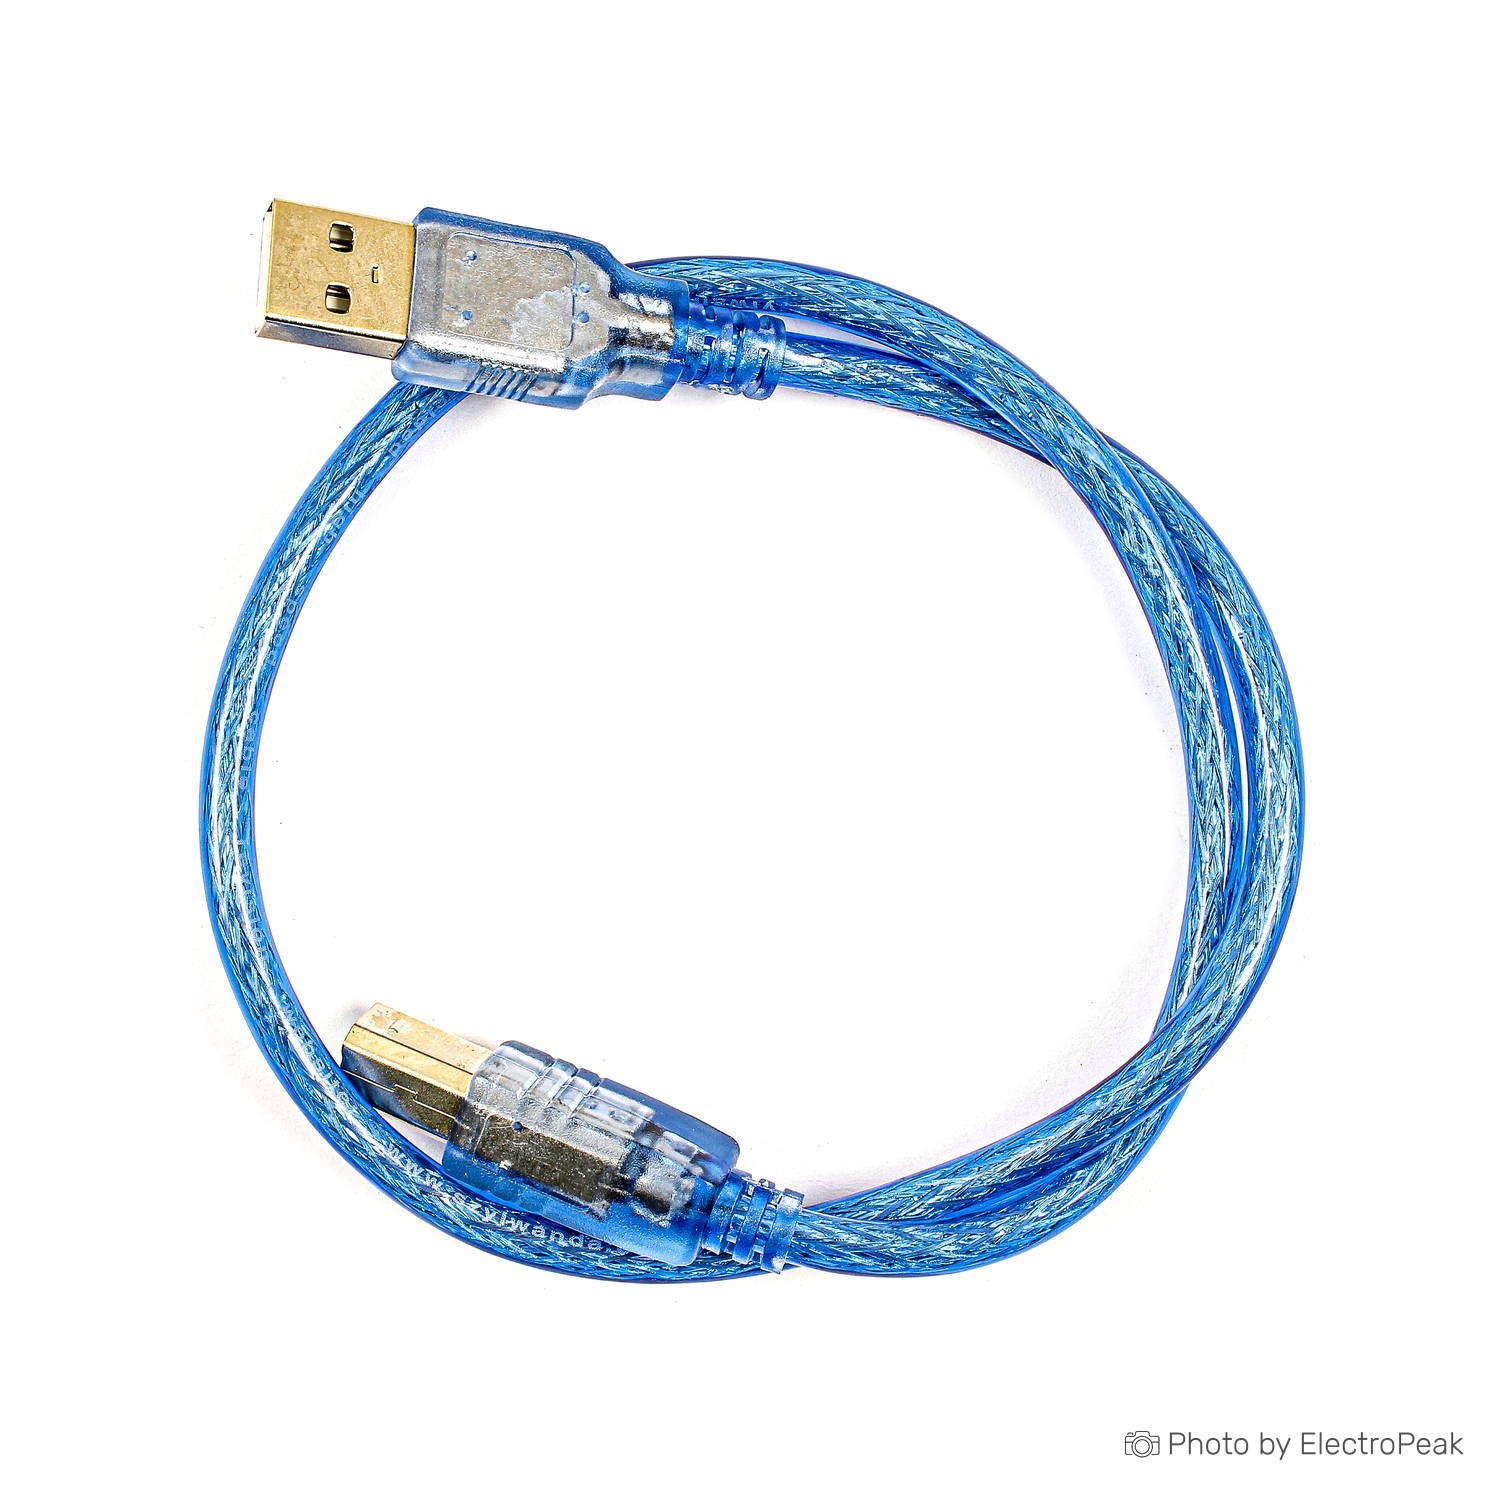 Arduino USB 2.0 Cable Type A/B [M000006]